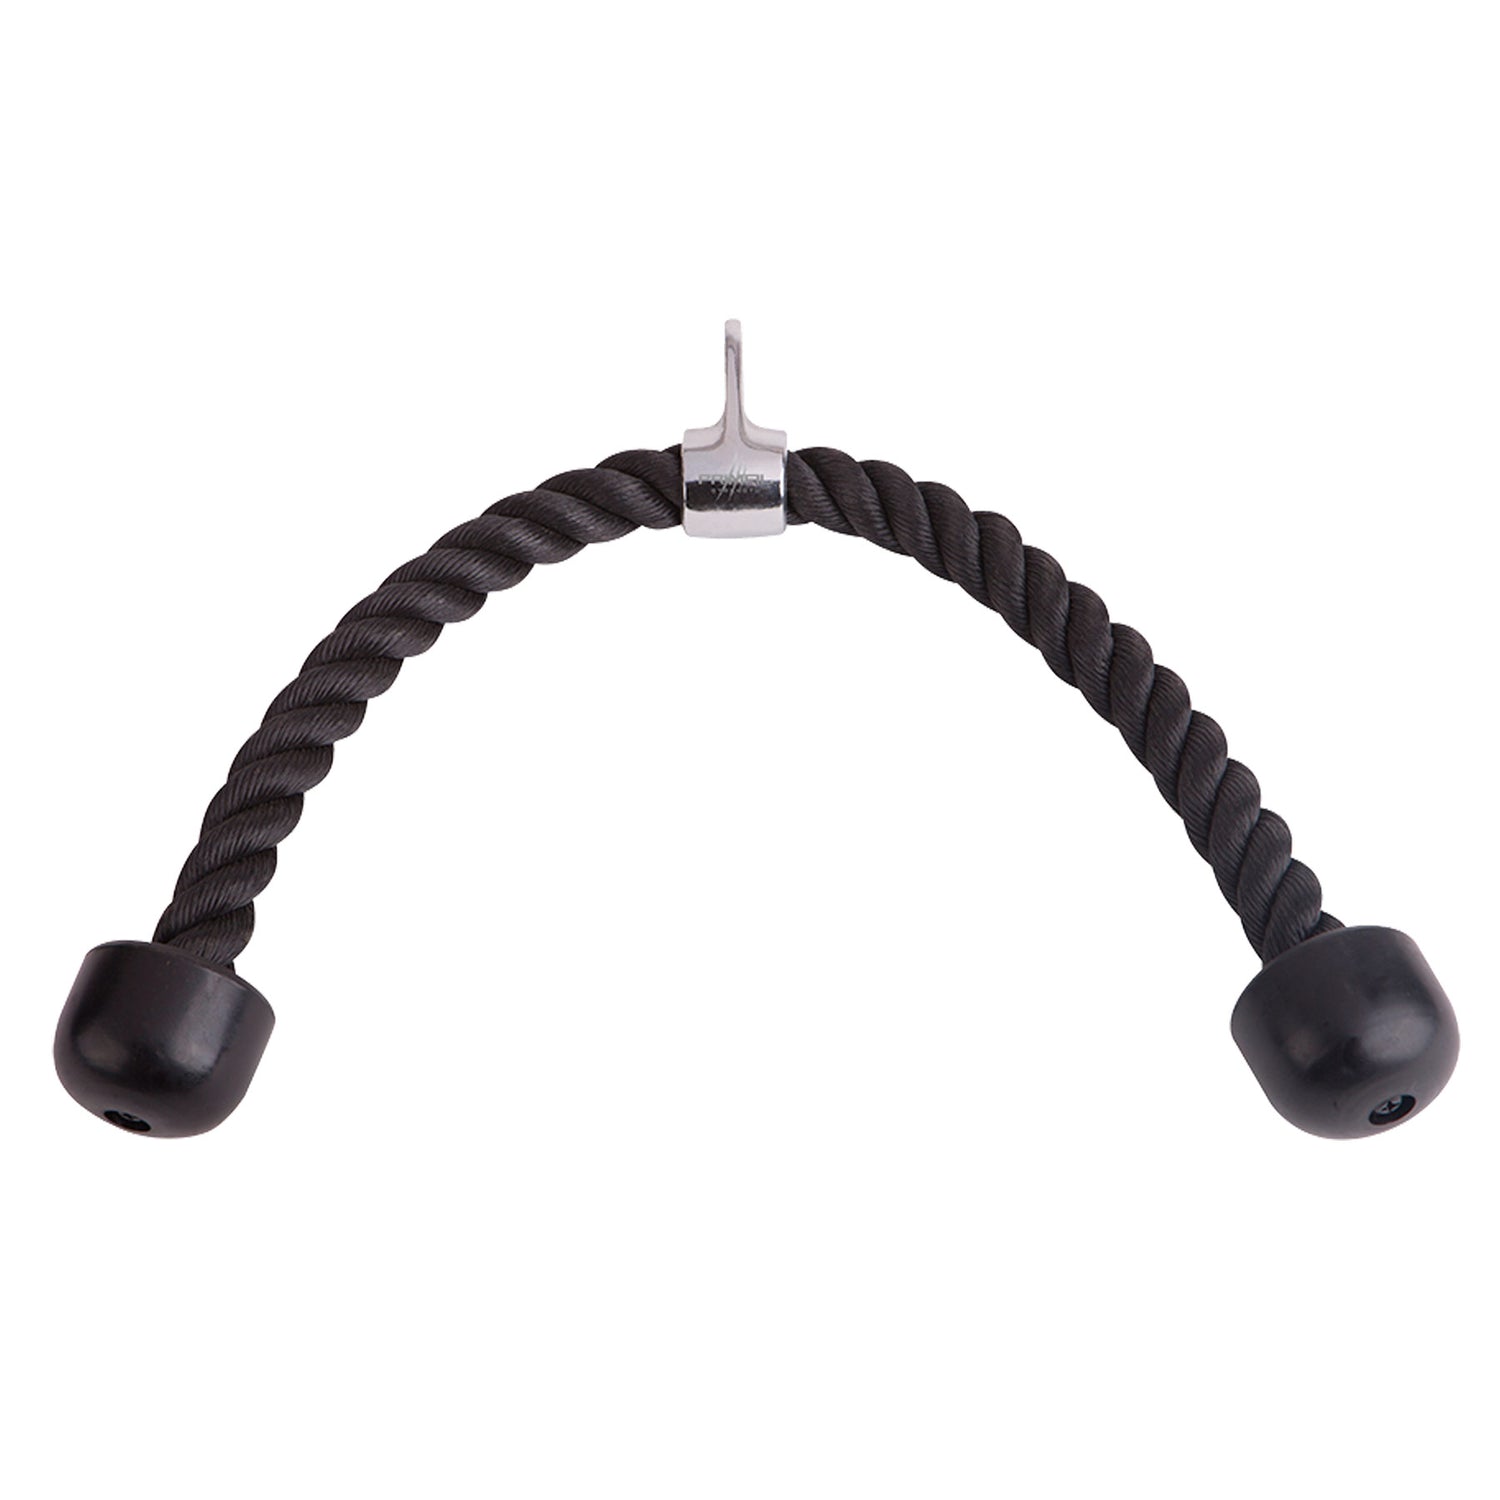 a black dual rope gym cable attachment